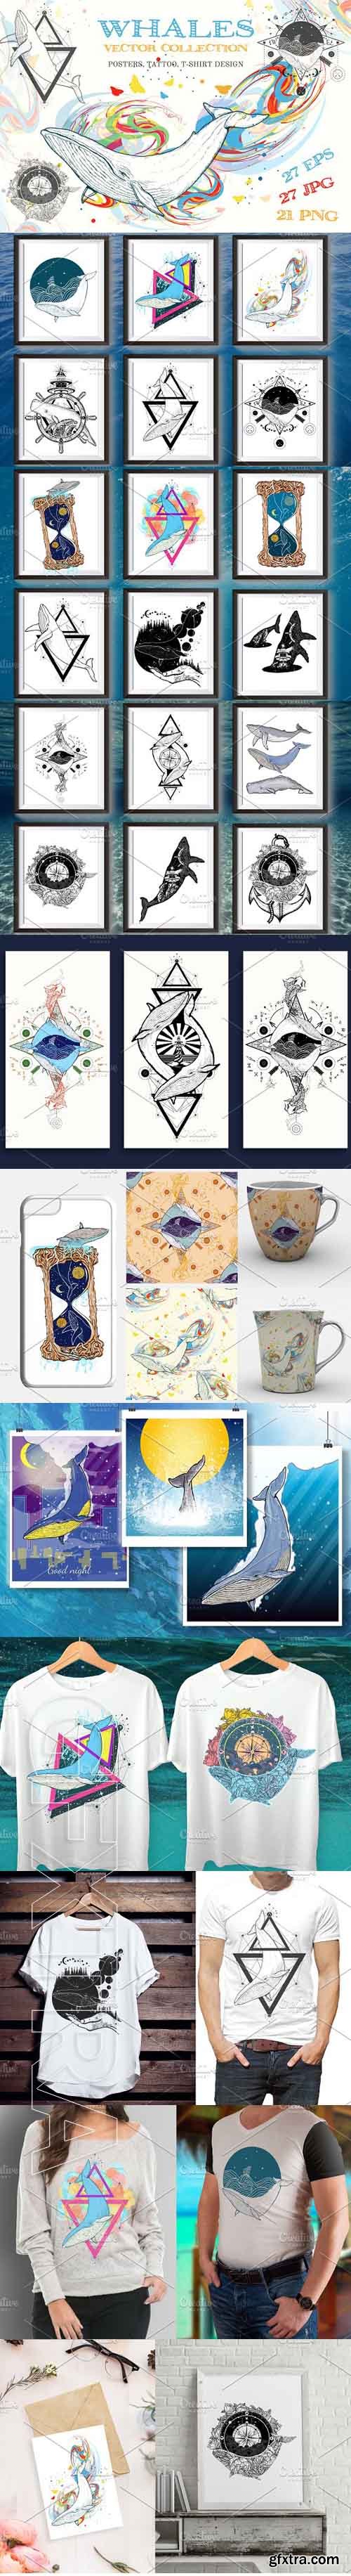 CreativeMarket - Whale collection 1802997